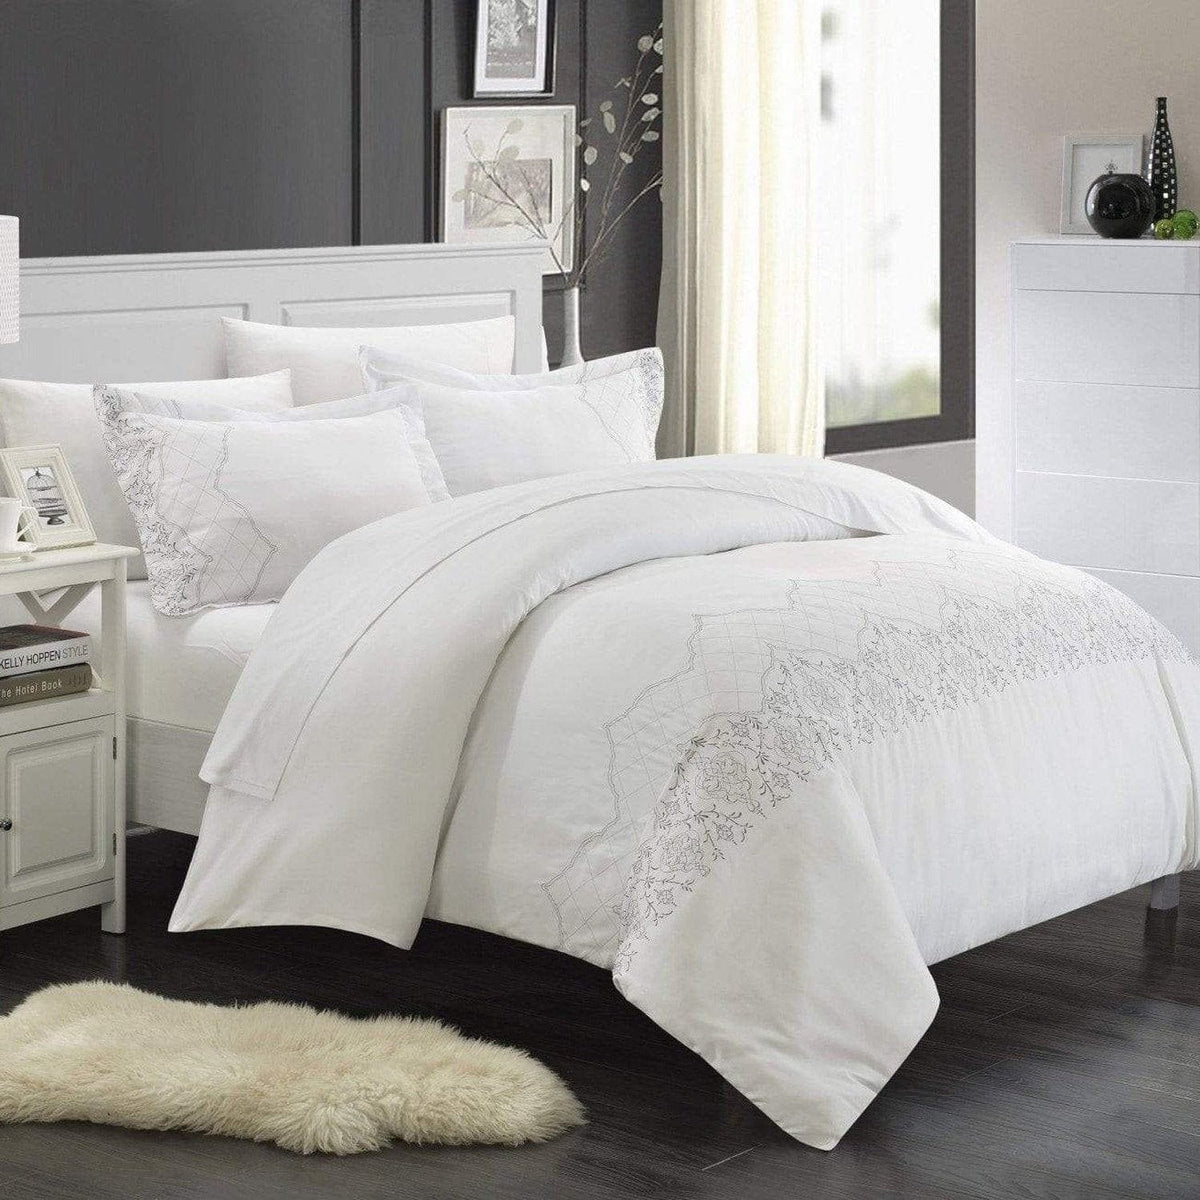 Chic Home Sophia 7 Piece Embroidered Duvet Cover Set 